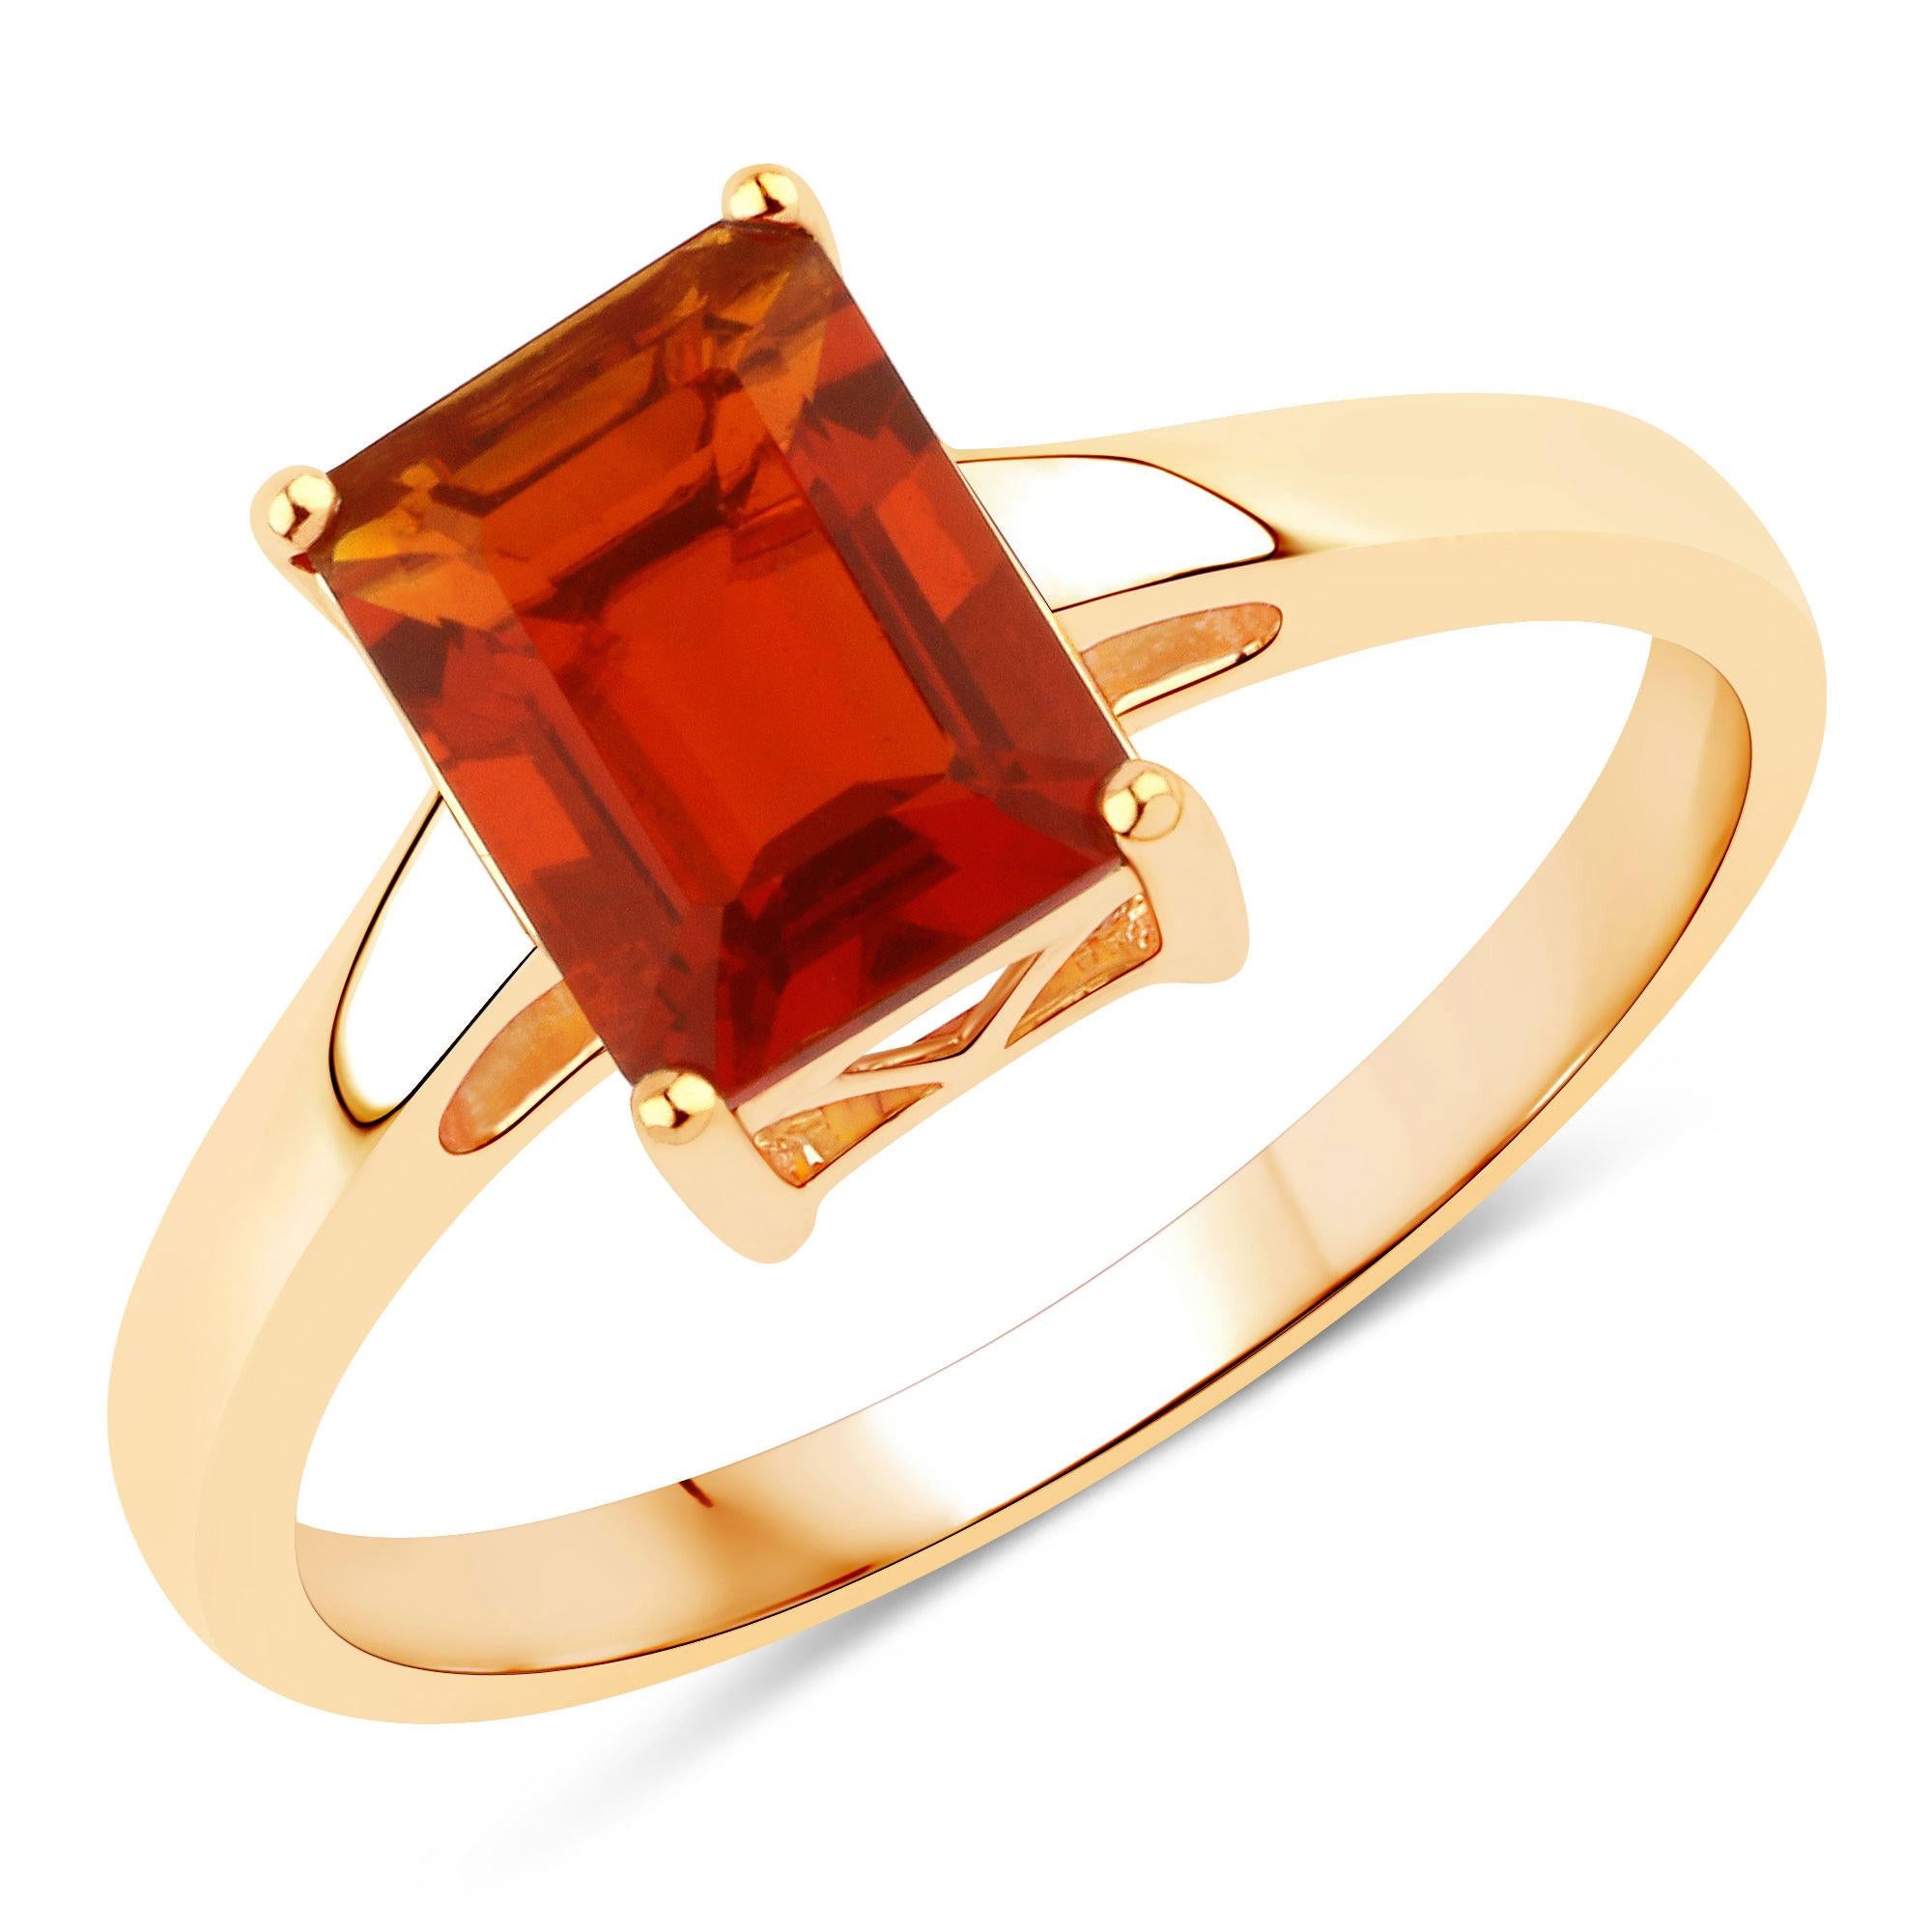 Contemporary Natural 1.02 Carat Fire Opal Solitaire Ring 14K Yellow Gold For Sale